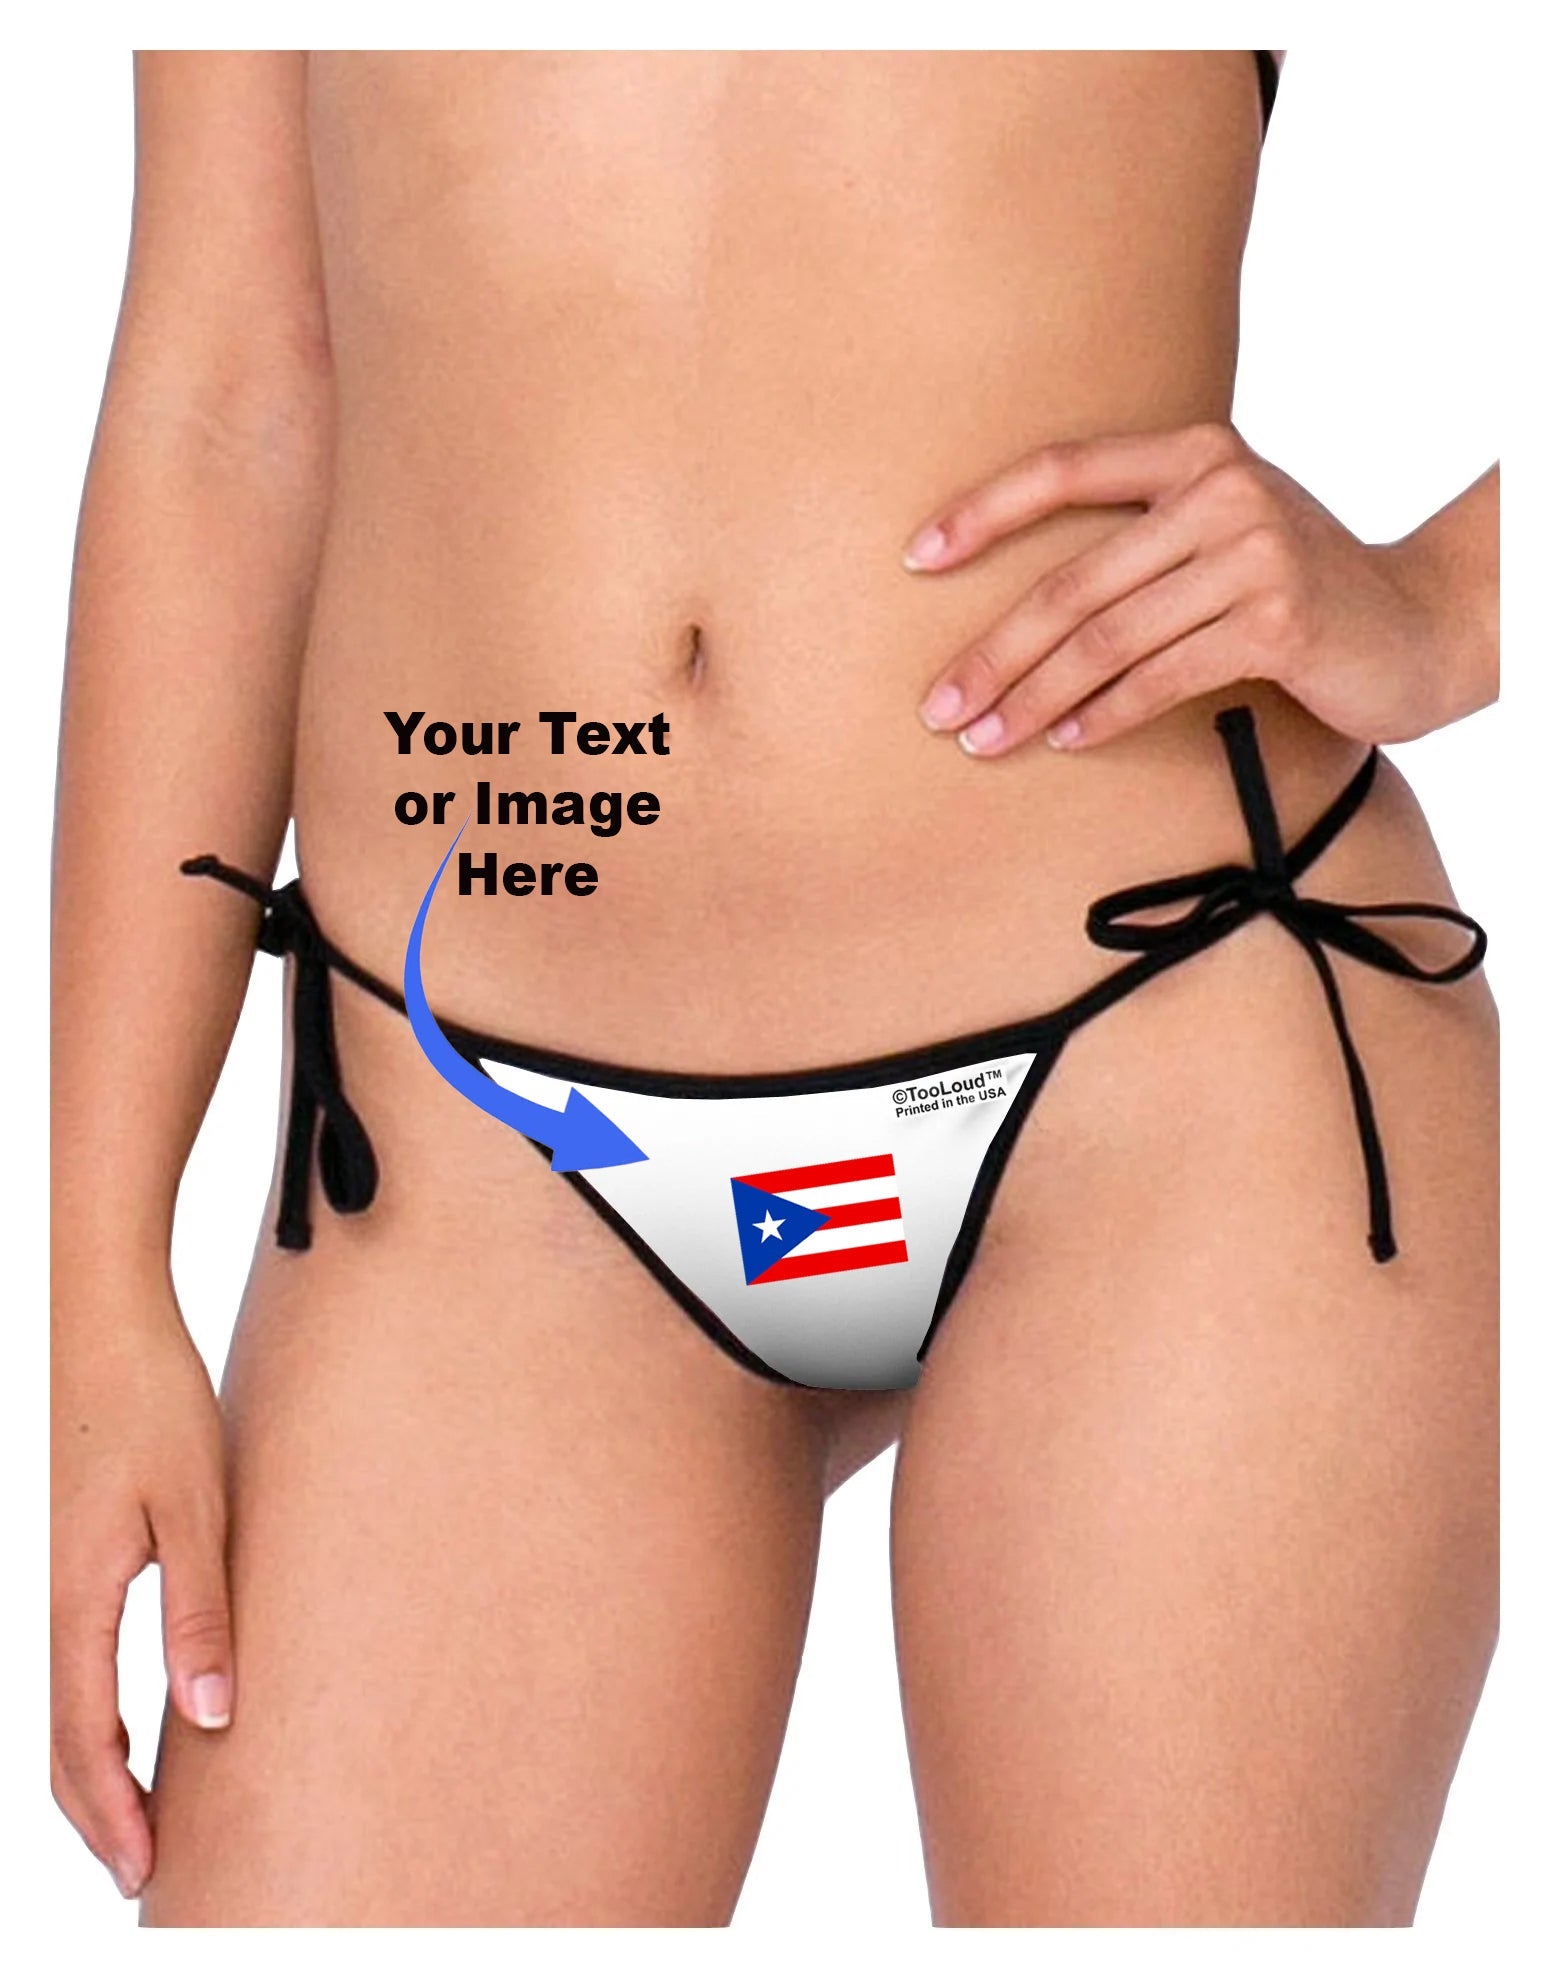 Custom Personalized Thong Panties With Your Words Custom Printed